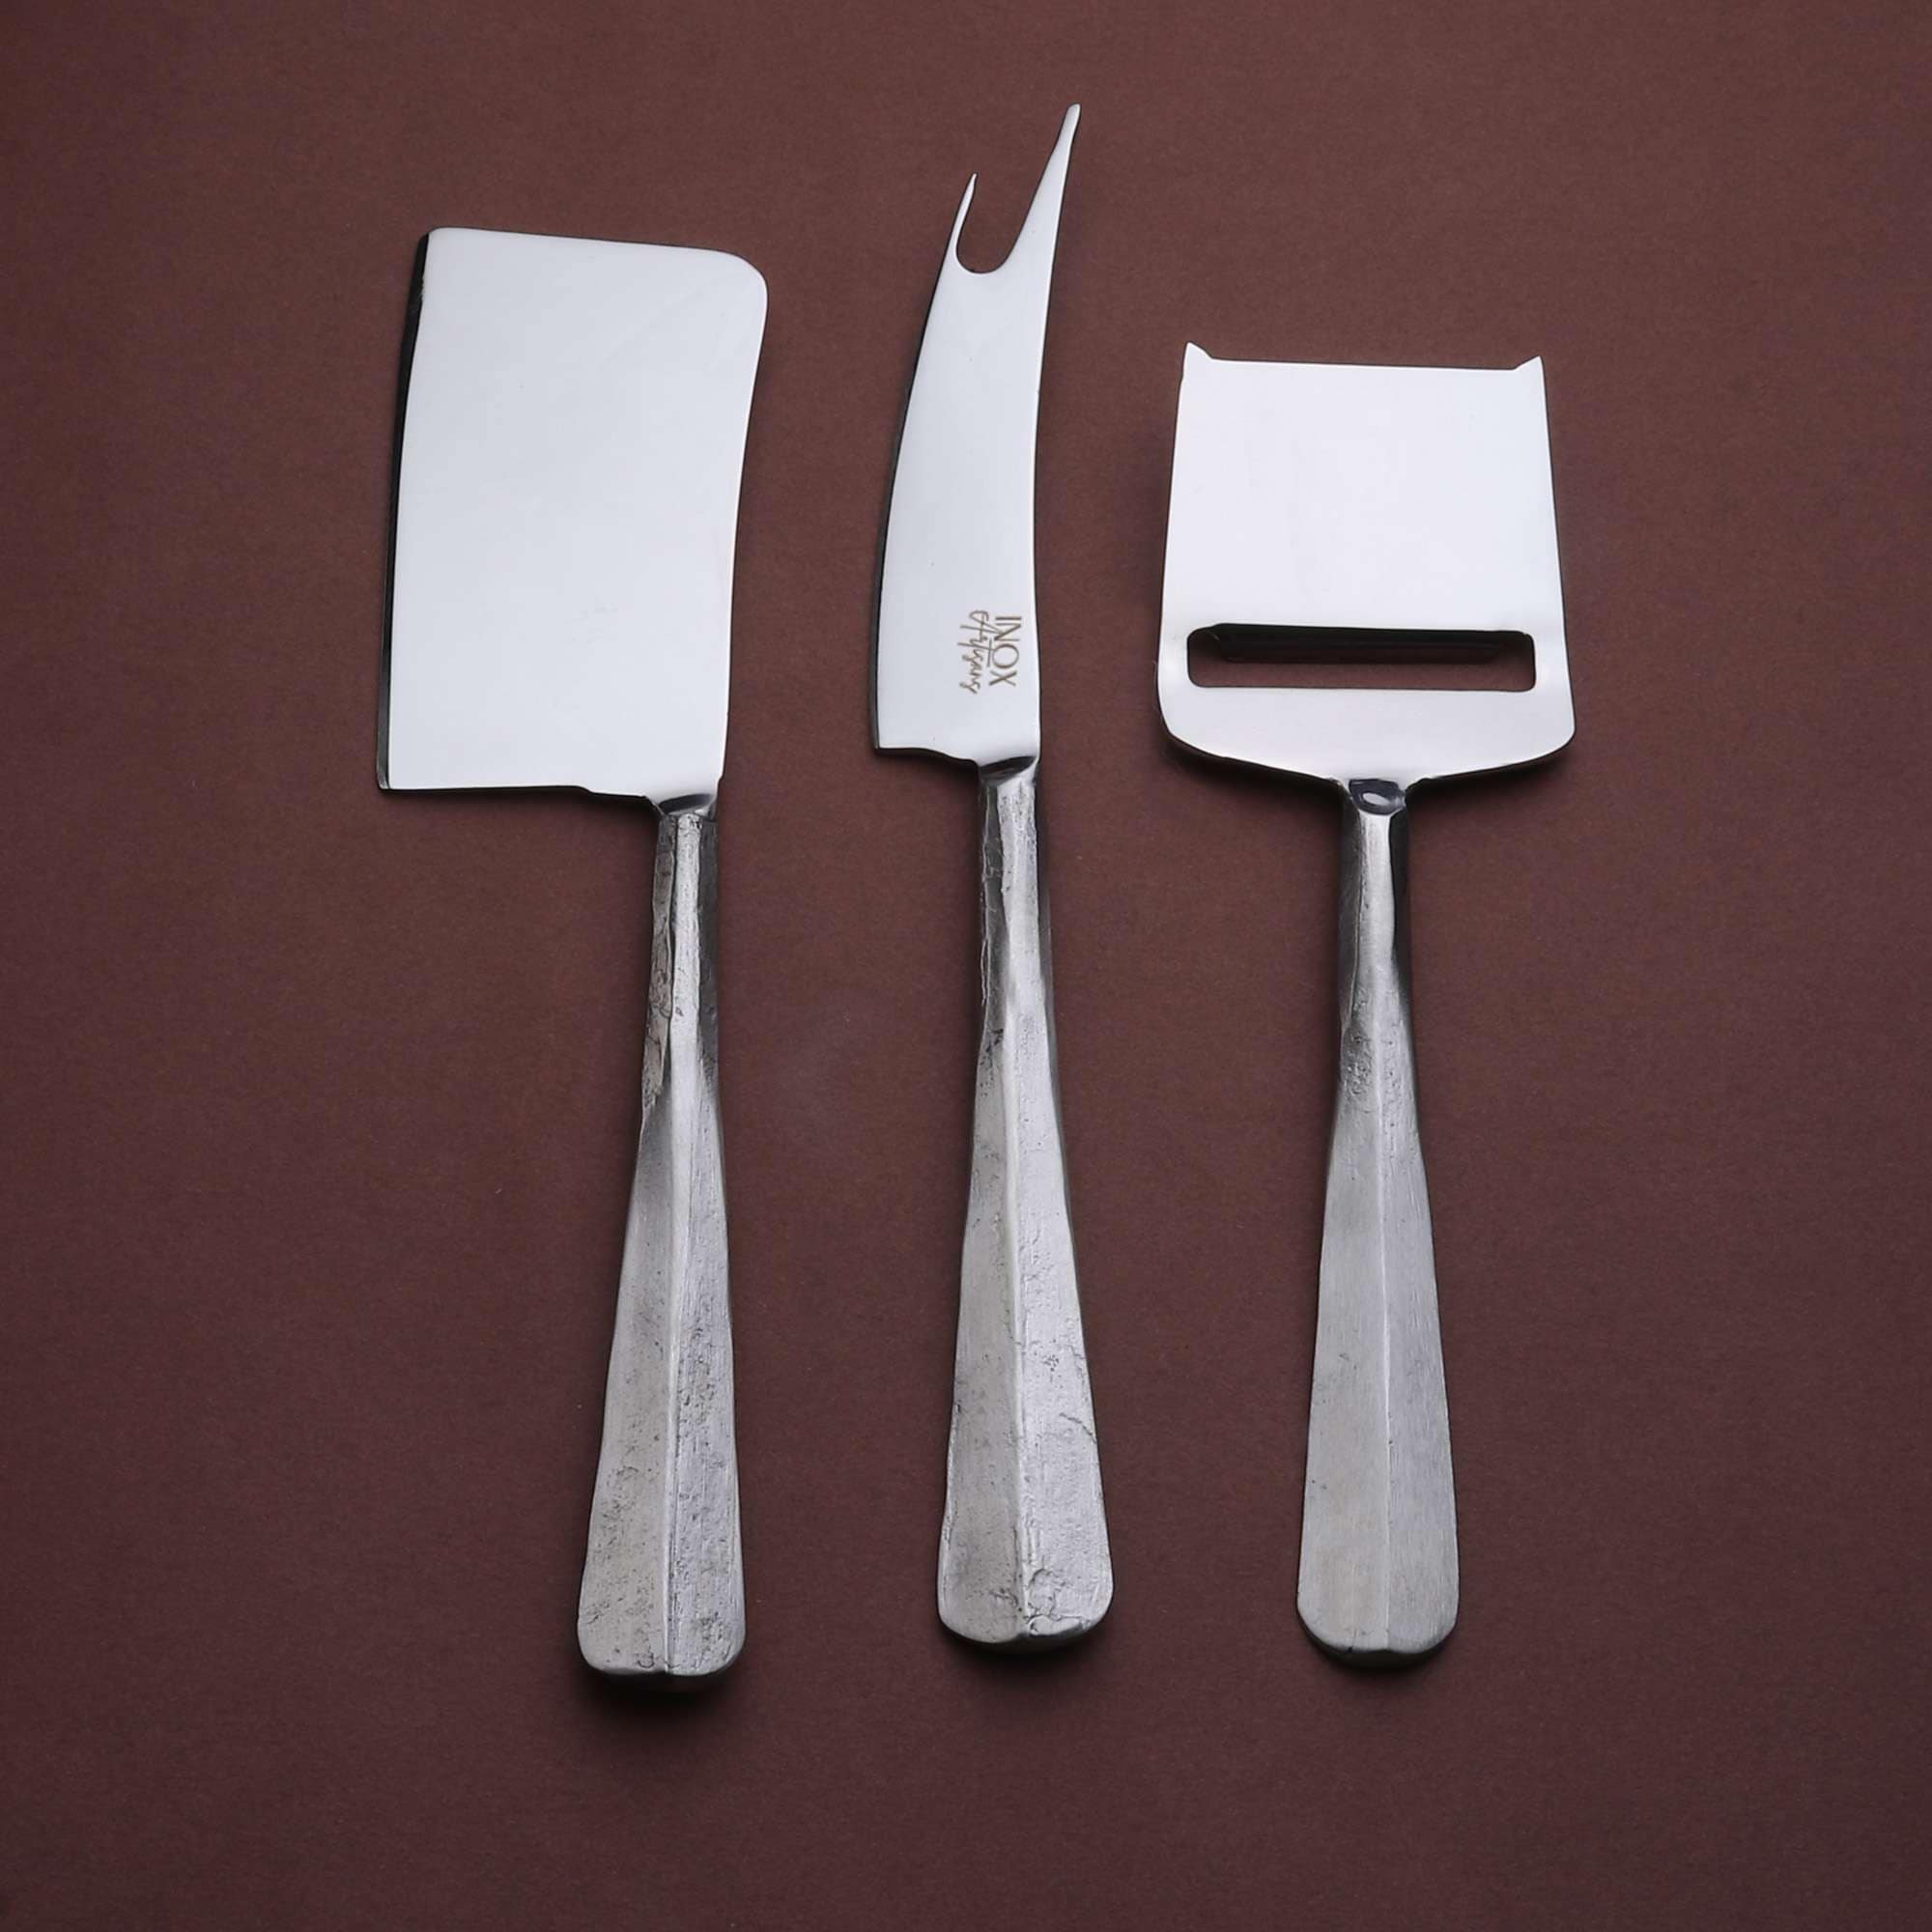 Cheese Accessories - Shaver, Cleaver, Knife. Spreader, Cutting Board